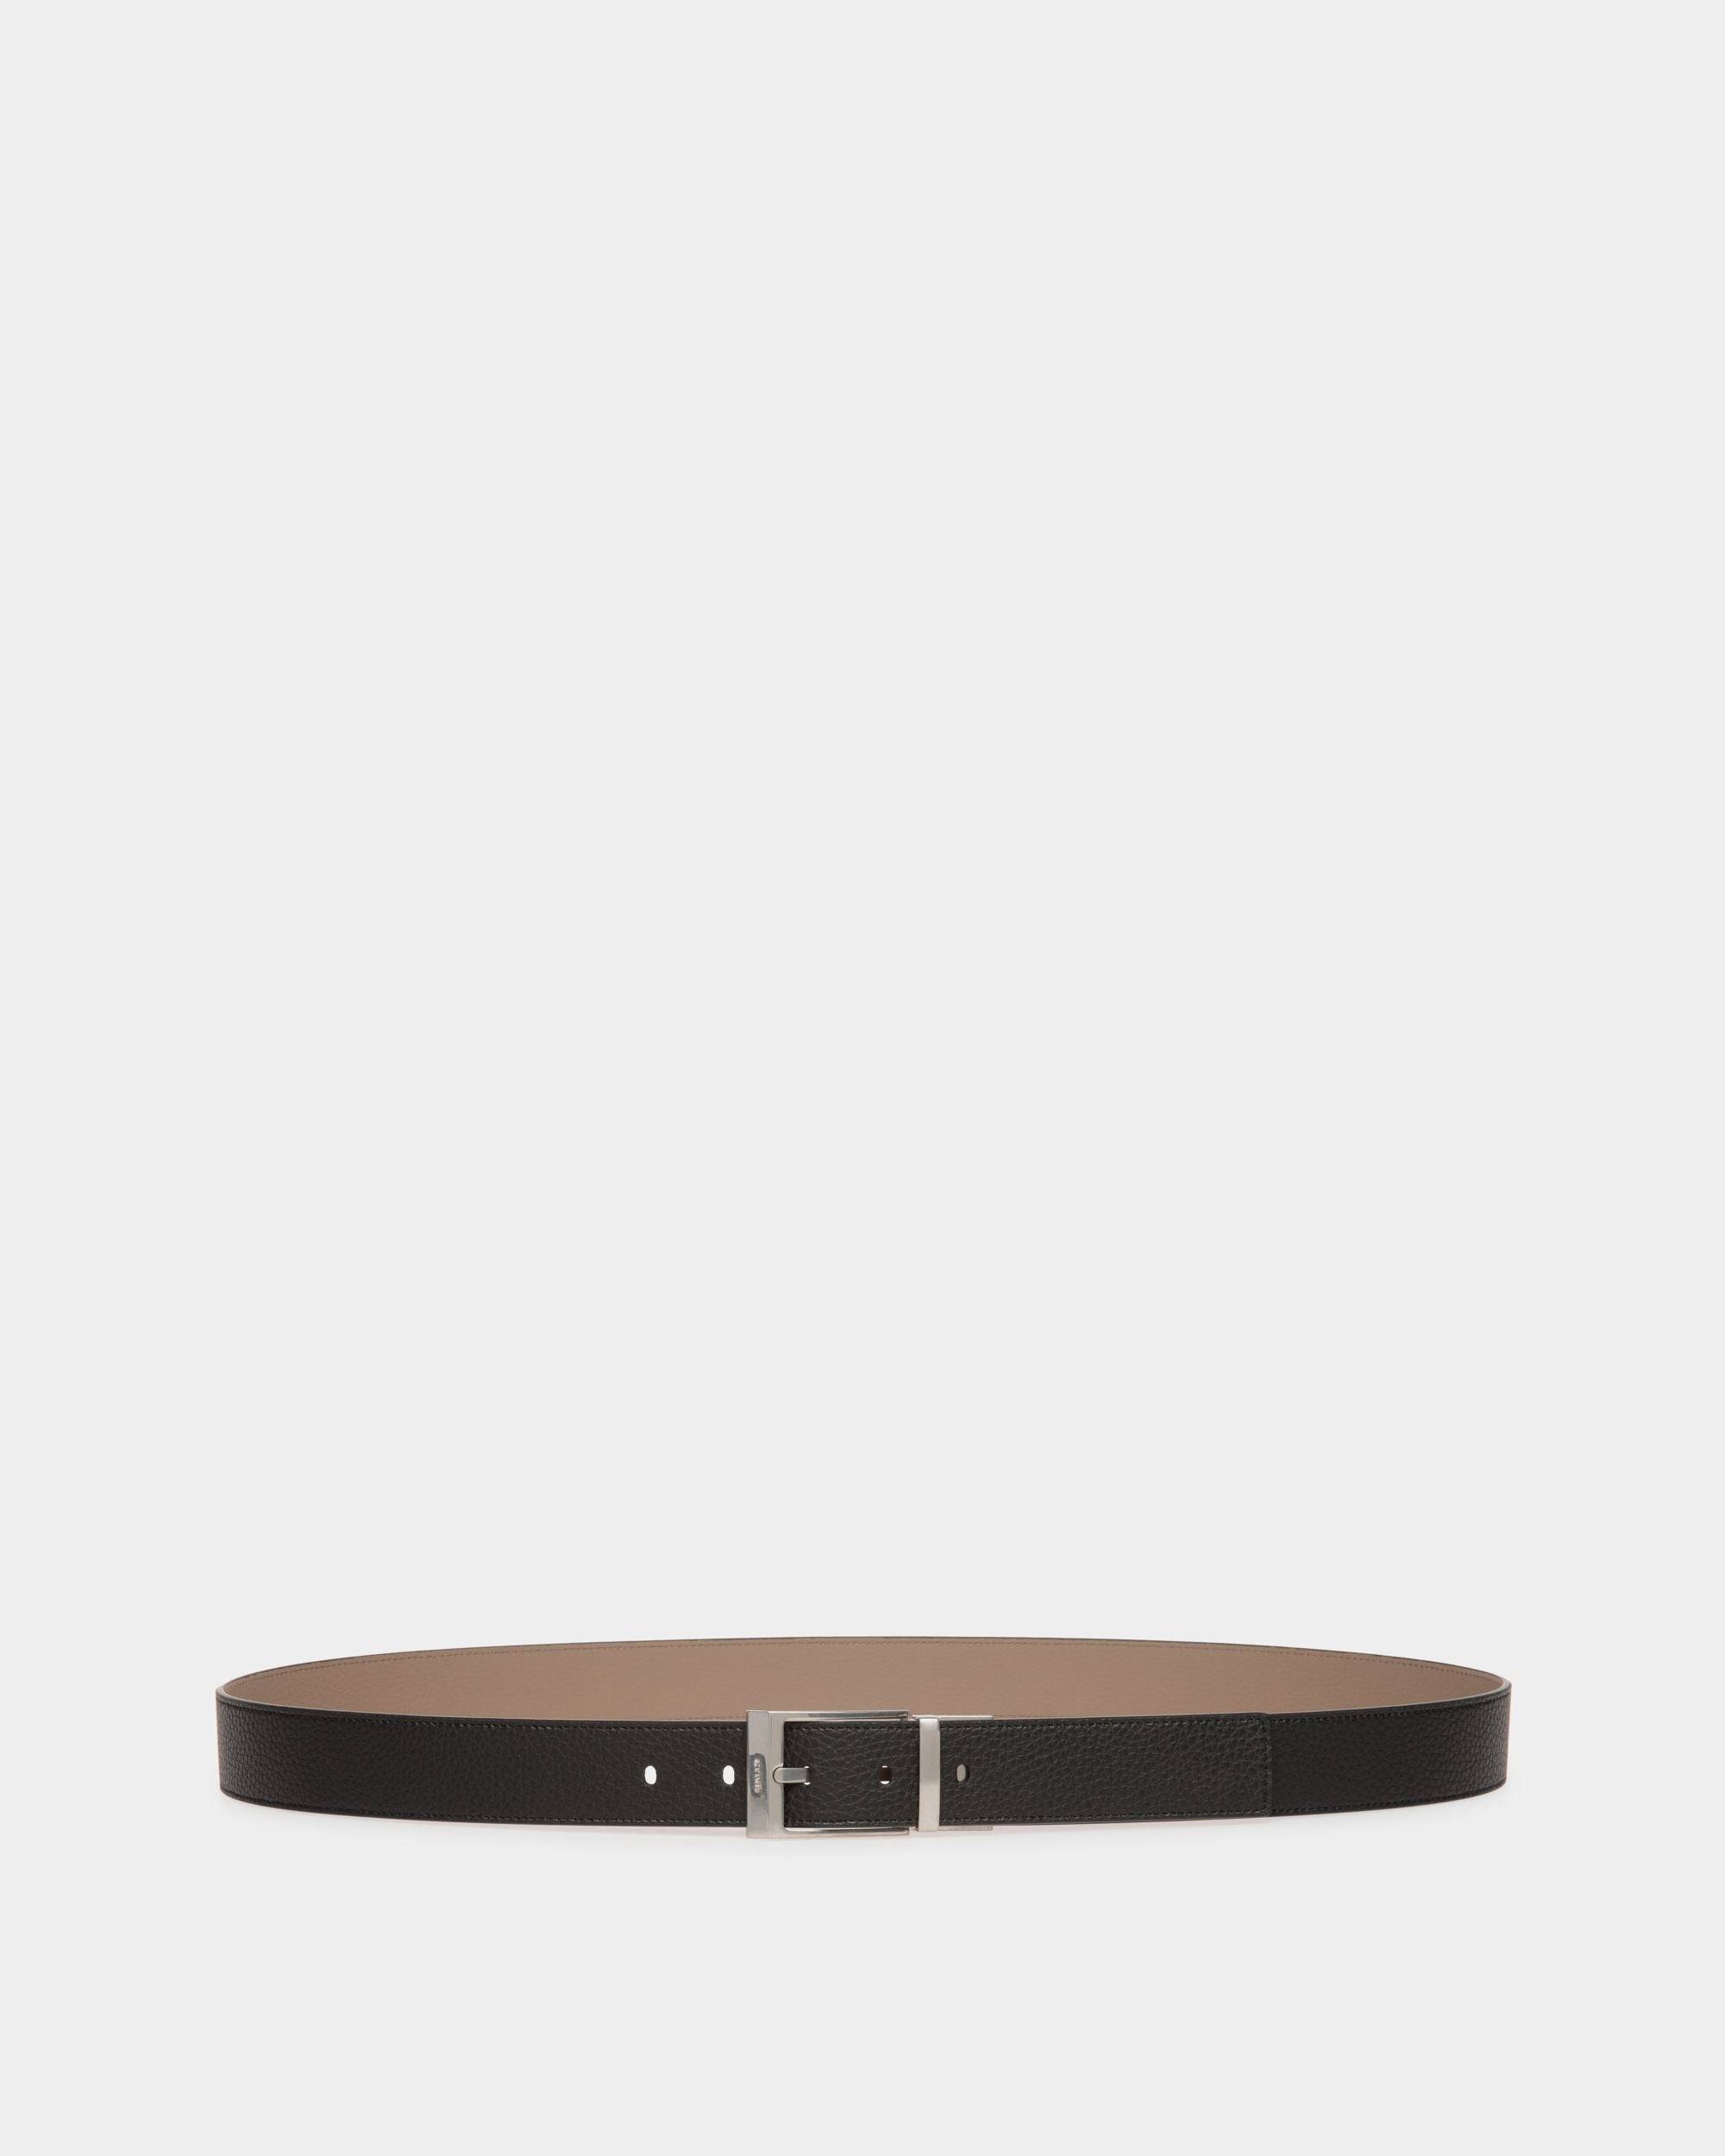 Men's Shiffie 35mm Reversible And Adjustable Belt in Black And Beige Leather | Bally | Still Life Front